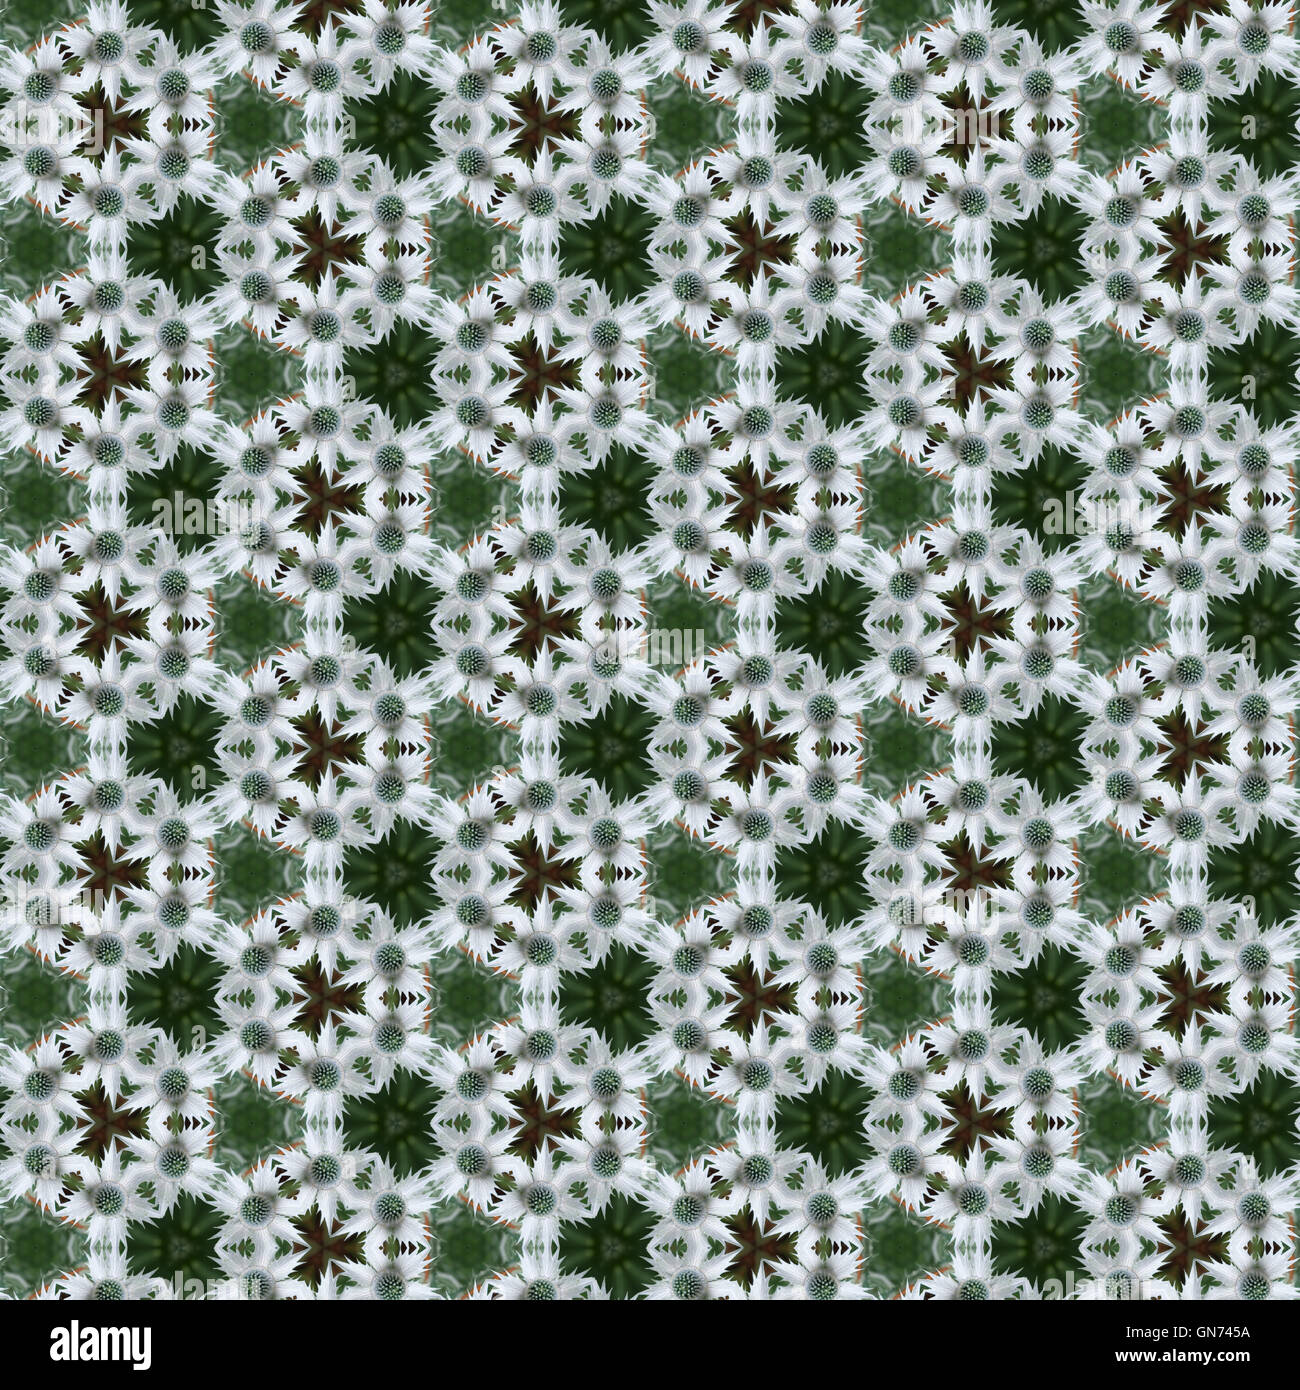 Green and white Sea Holly or Eryngium spiky flowers in a tileable seamless repeat pattern Stock Photo